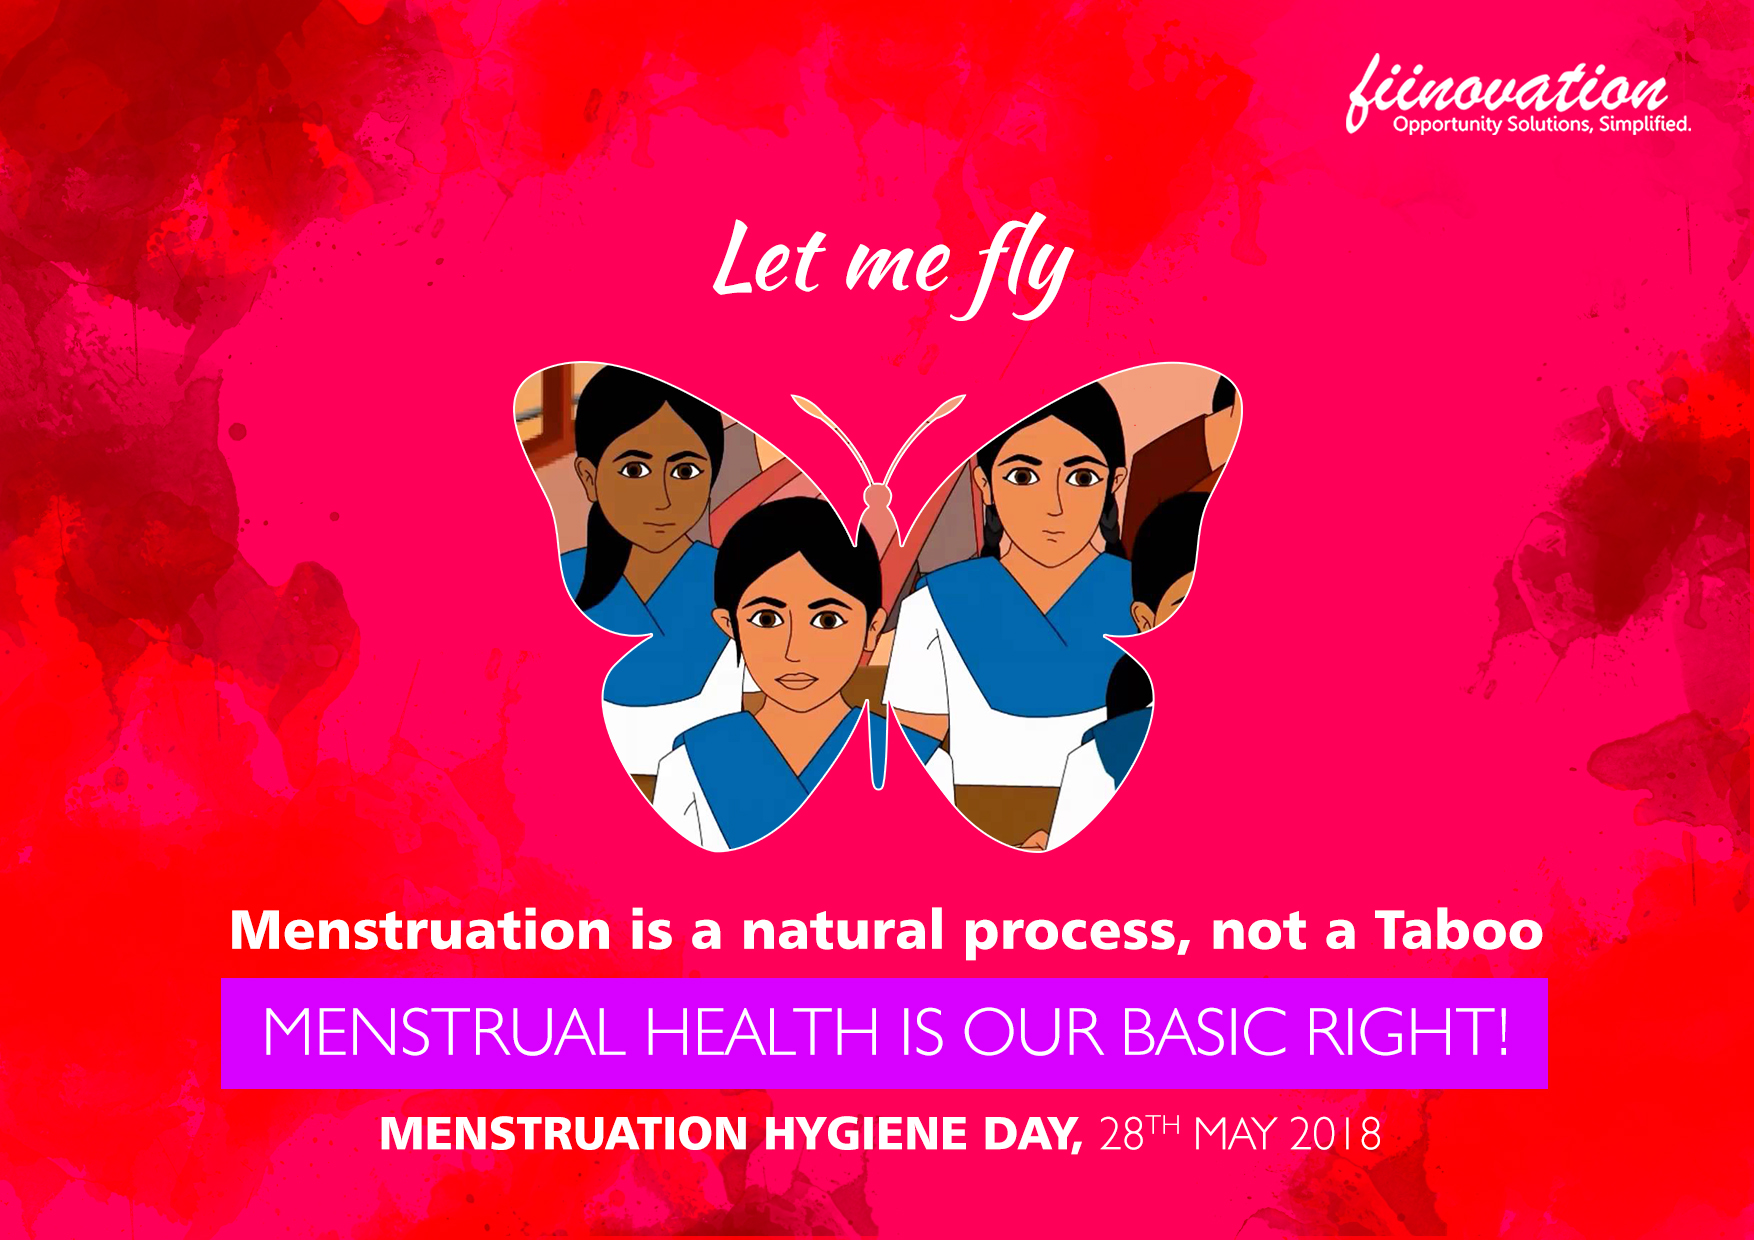 Cultural norms and policy foul, a big challenge in addressing menstrual hygiene.